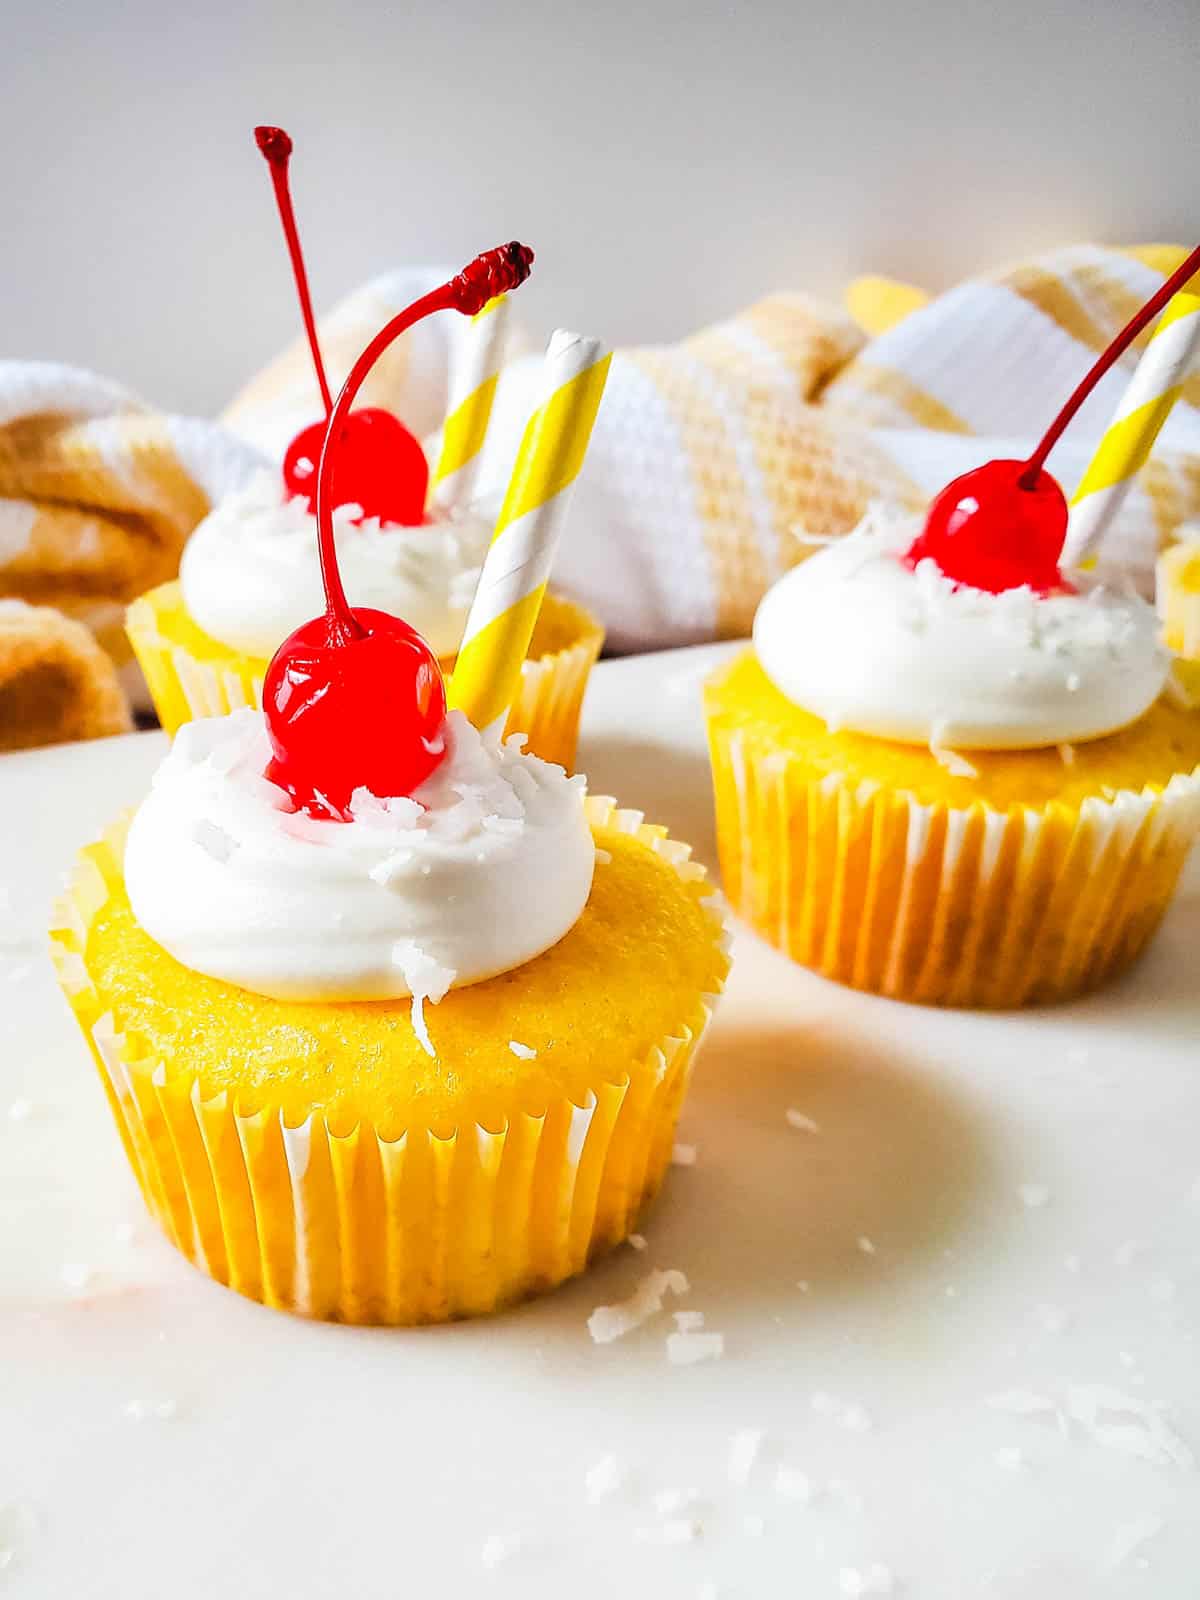 Finished product of this easy boozy pina colada cupcake recipe.